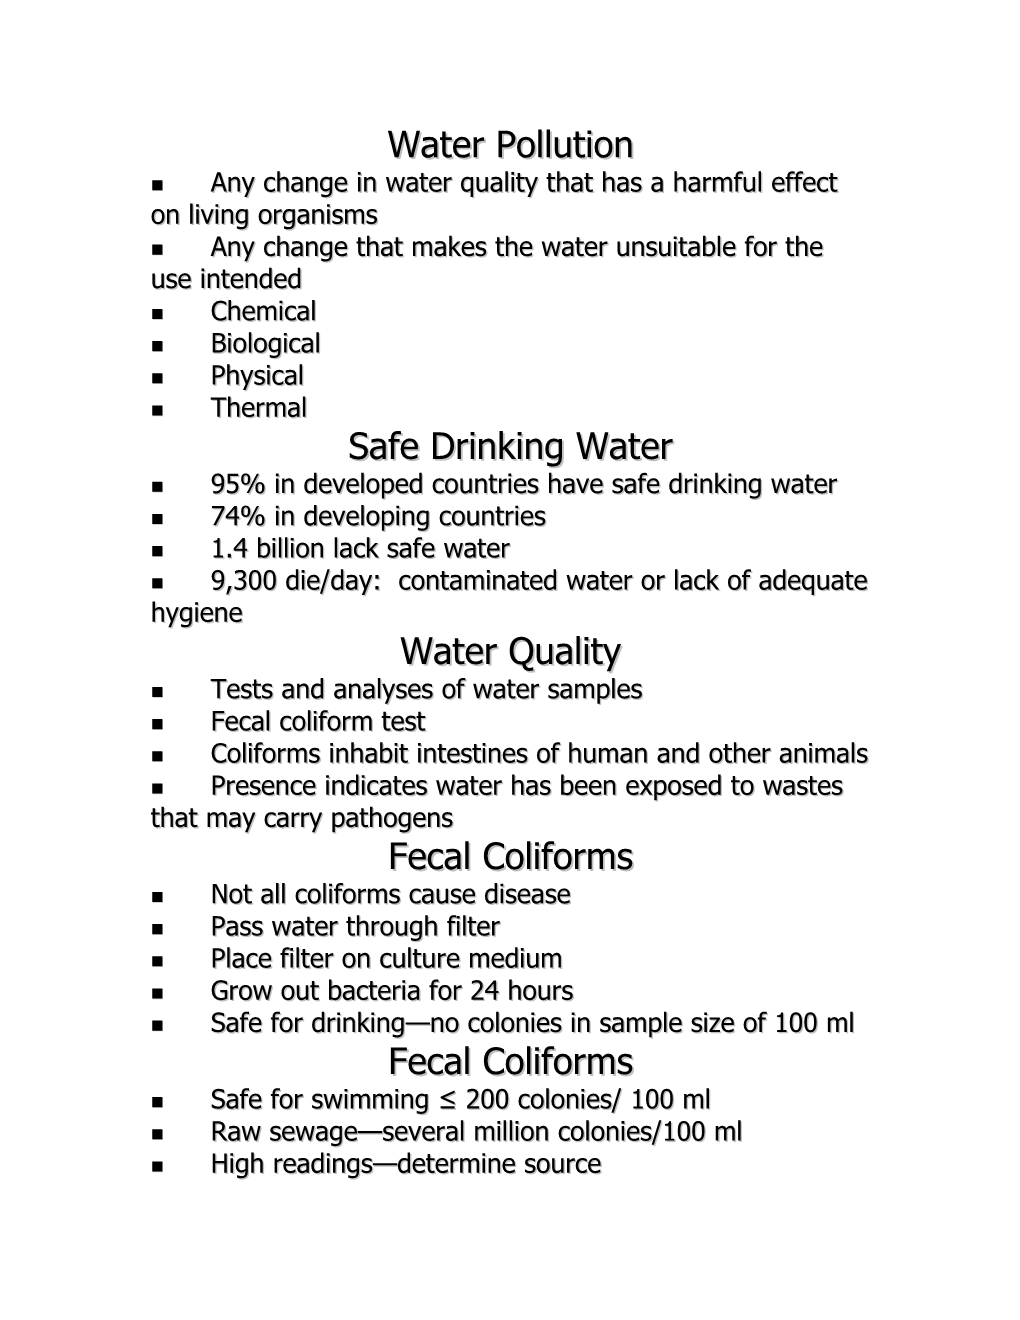 Any Change in Water Quality That Has a Harmful Effect on Living Organisms